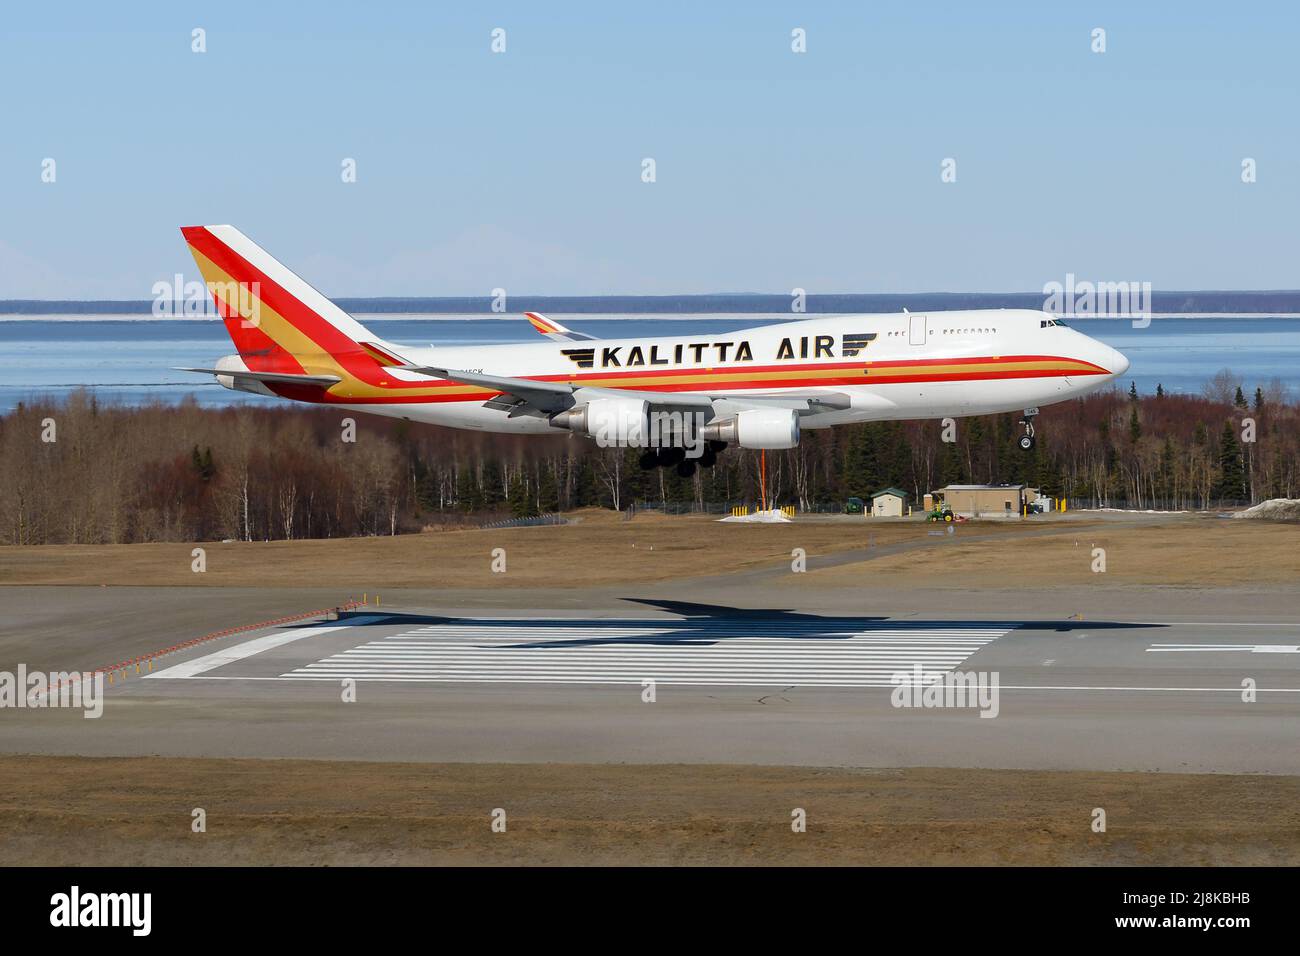 Kalitta Air Cargo Boeing 747-400F freighter plane landing. Large cargo airplane 747. Aircraft 747F arrival in Anchorage Airport. Stock Photo